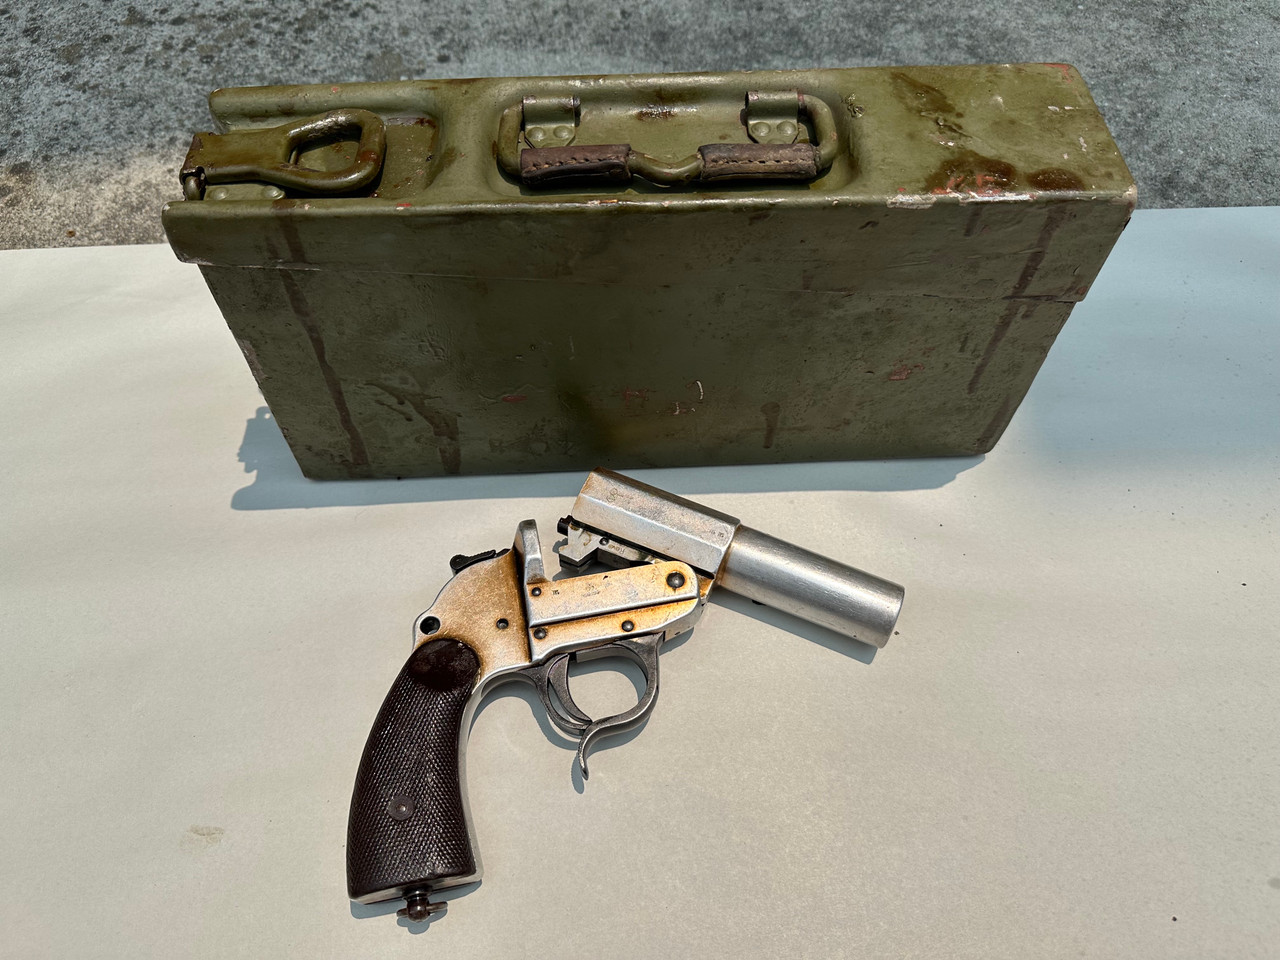 Lot 230717-03: Walther 1939 Banner Logo LP34 with Fallschirmjäger (paratrooper) Ammo Can - Aluminum Ammo Can (SHIPS FREE)